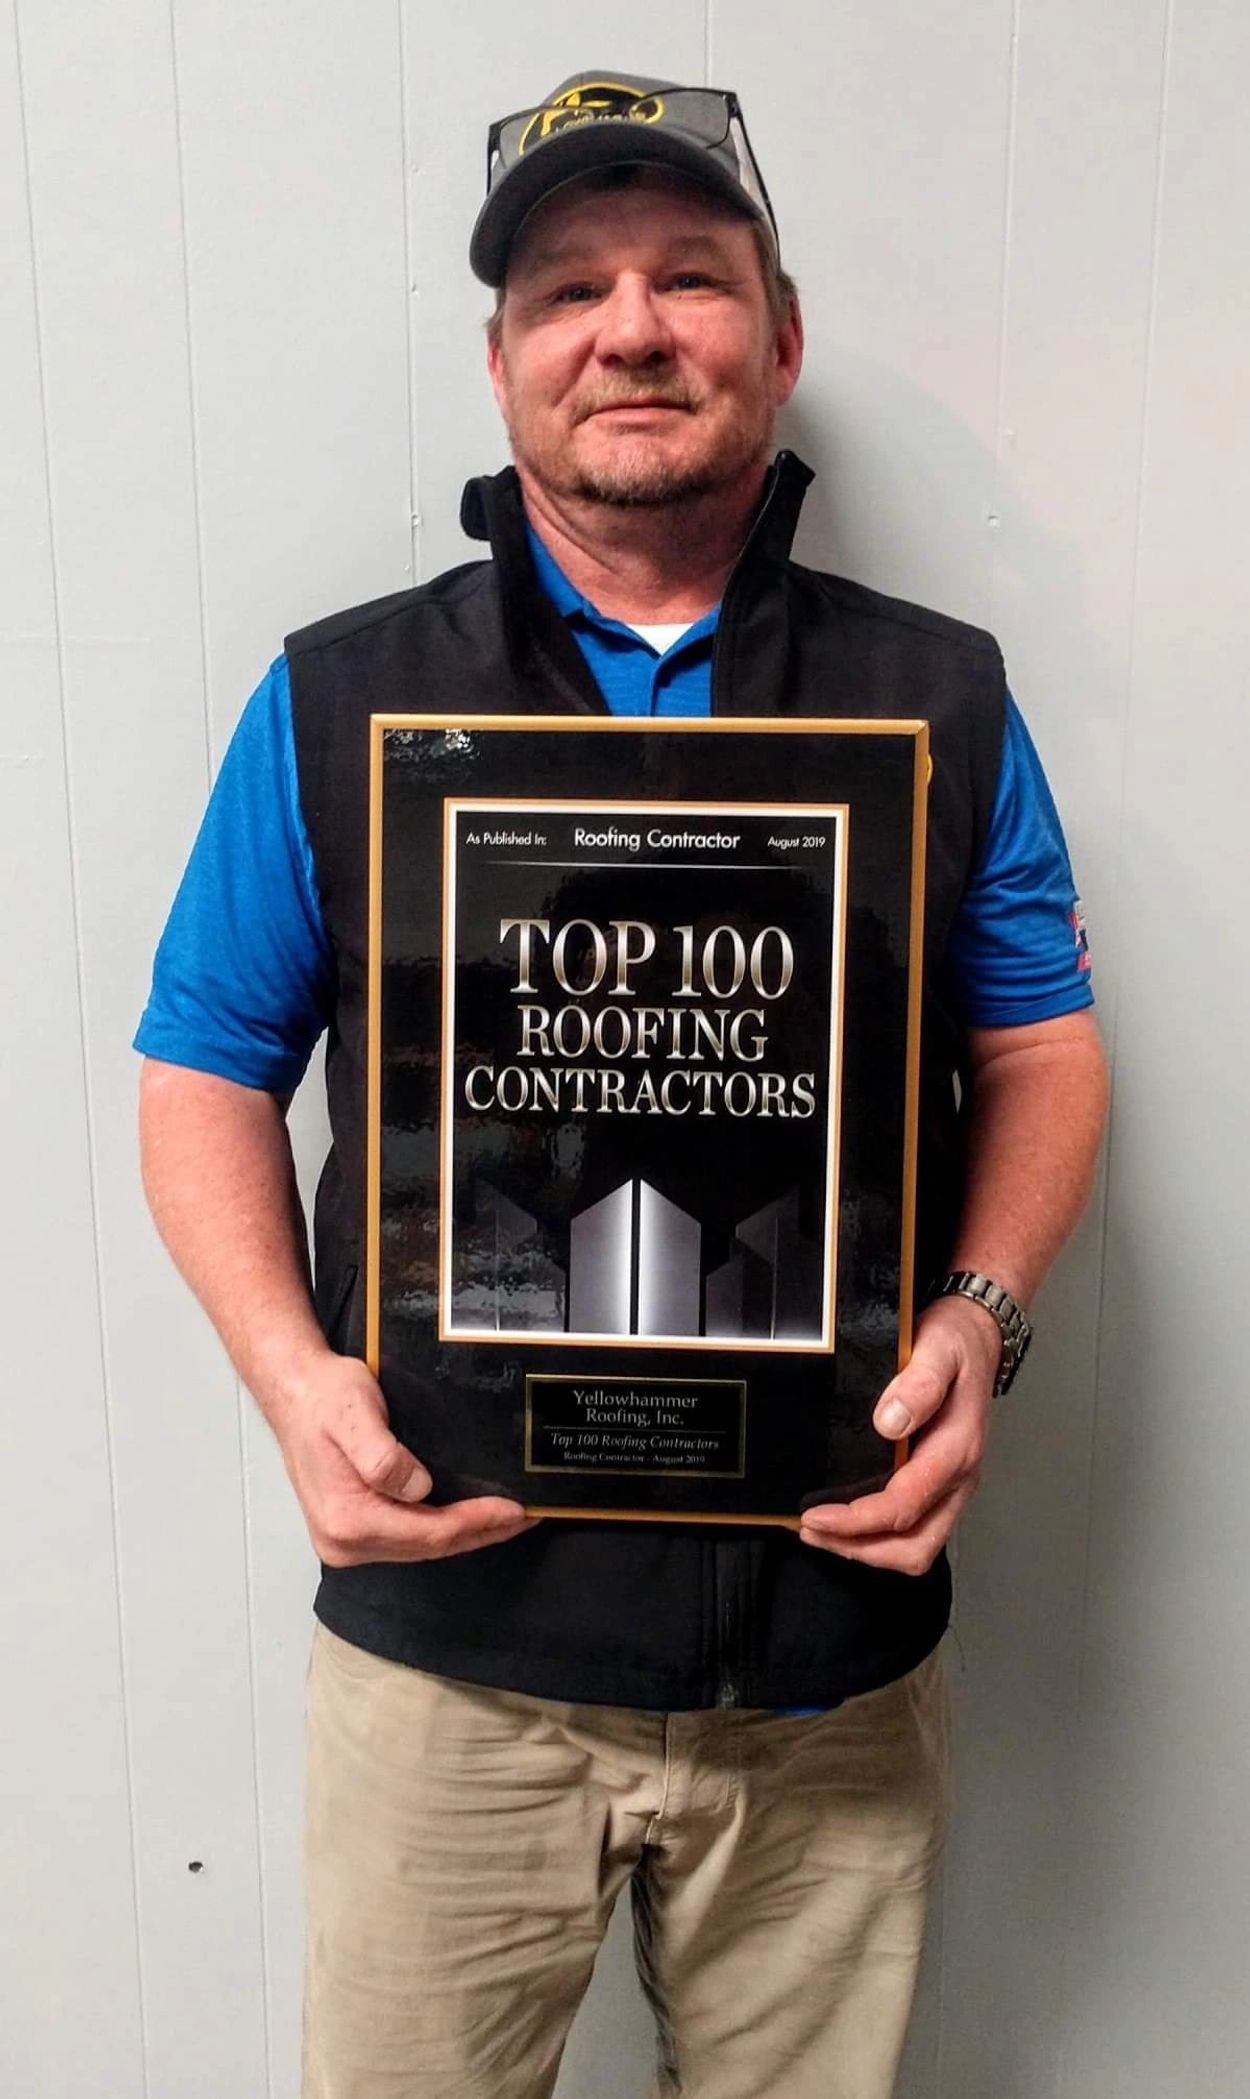 Top 100 Roofing Contractors in the USA